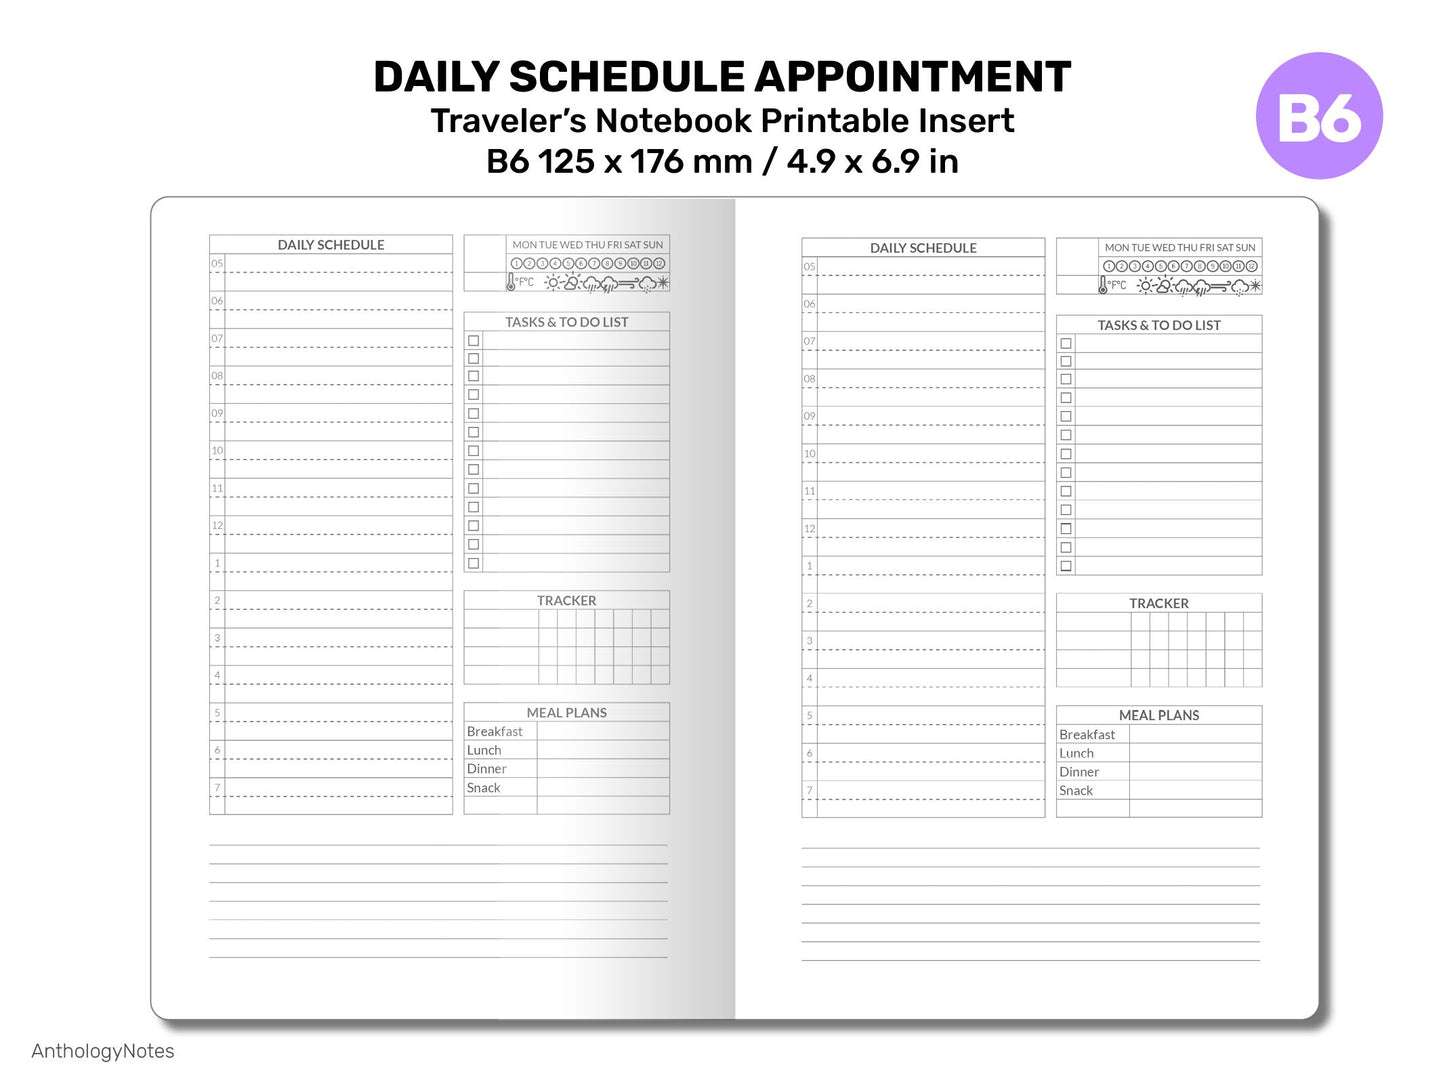 TN B6 Day on A Page Daily Appointment Printable Traveler's Notebook Insert